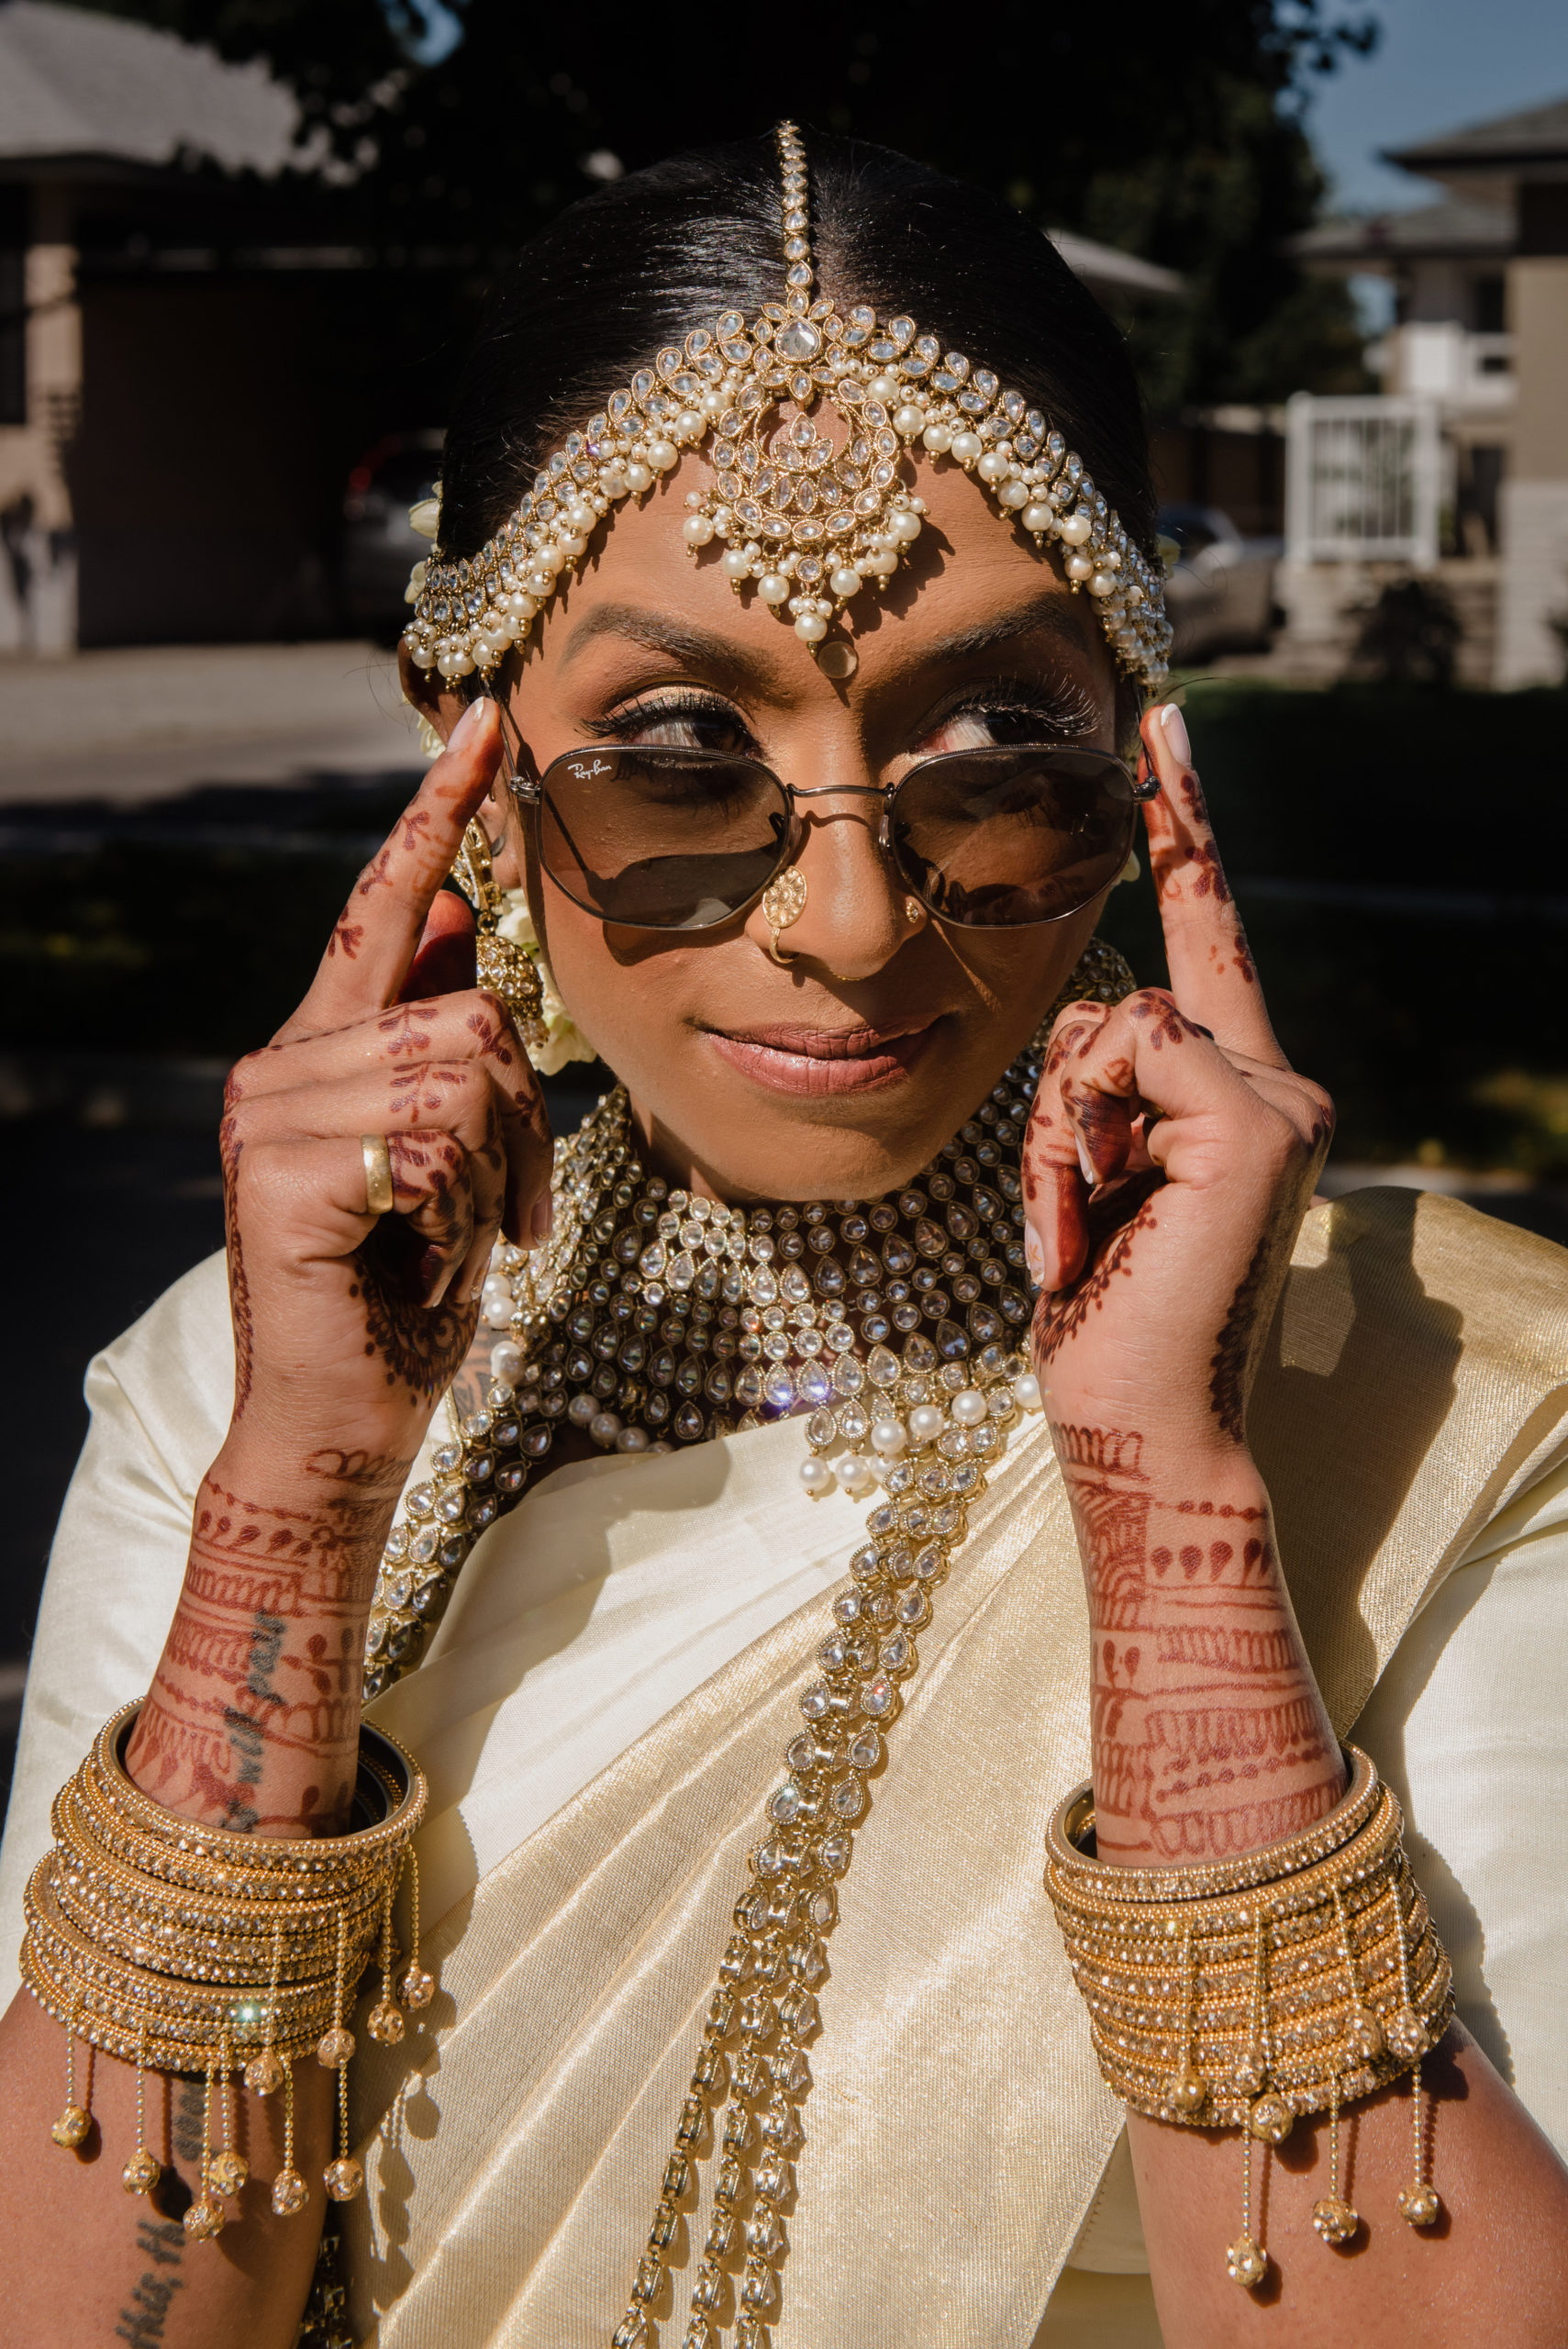 A South Asian person with wedding henna and jewelry holds their sunglasses and looks to the left.